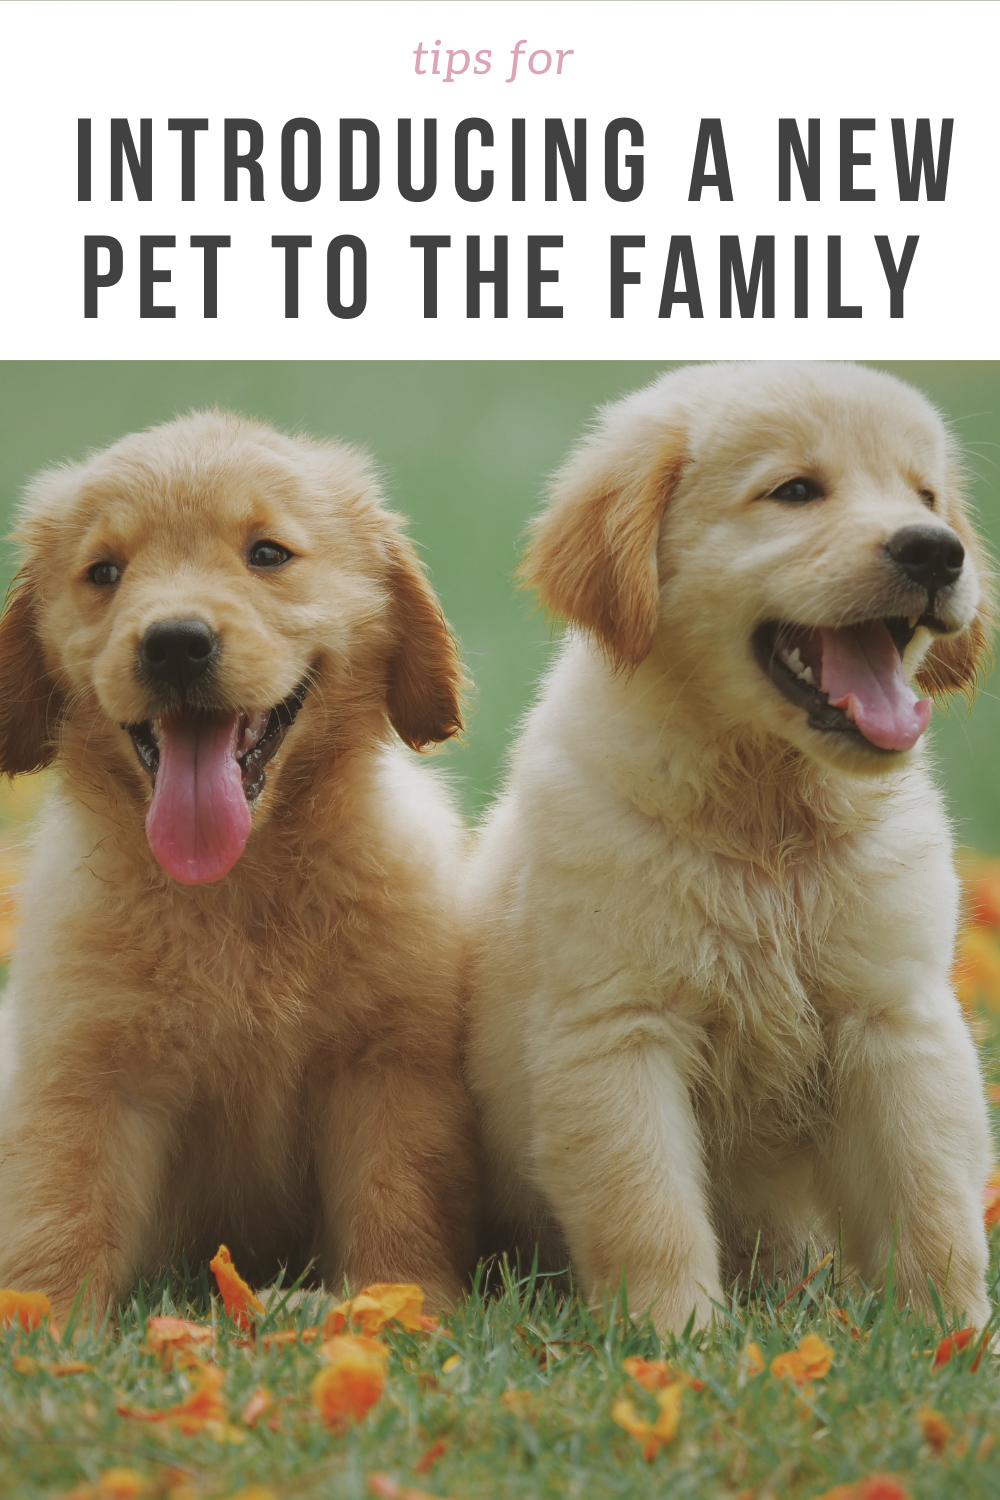 Tips for Introducing a New Pet to The Family